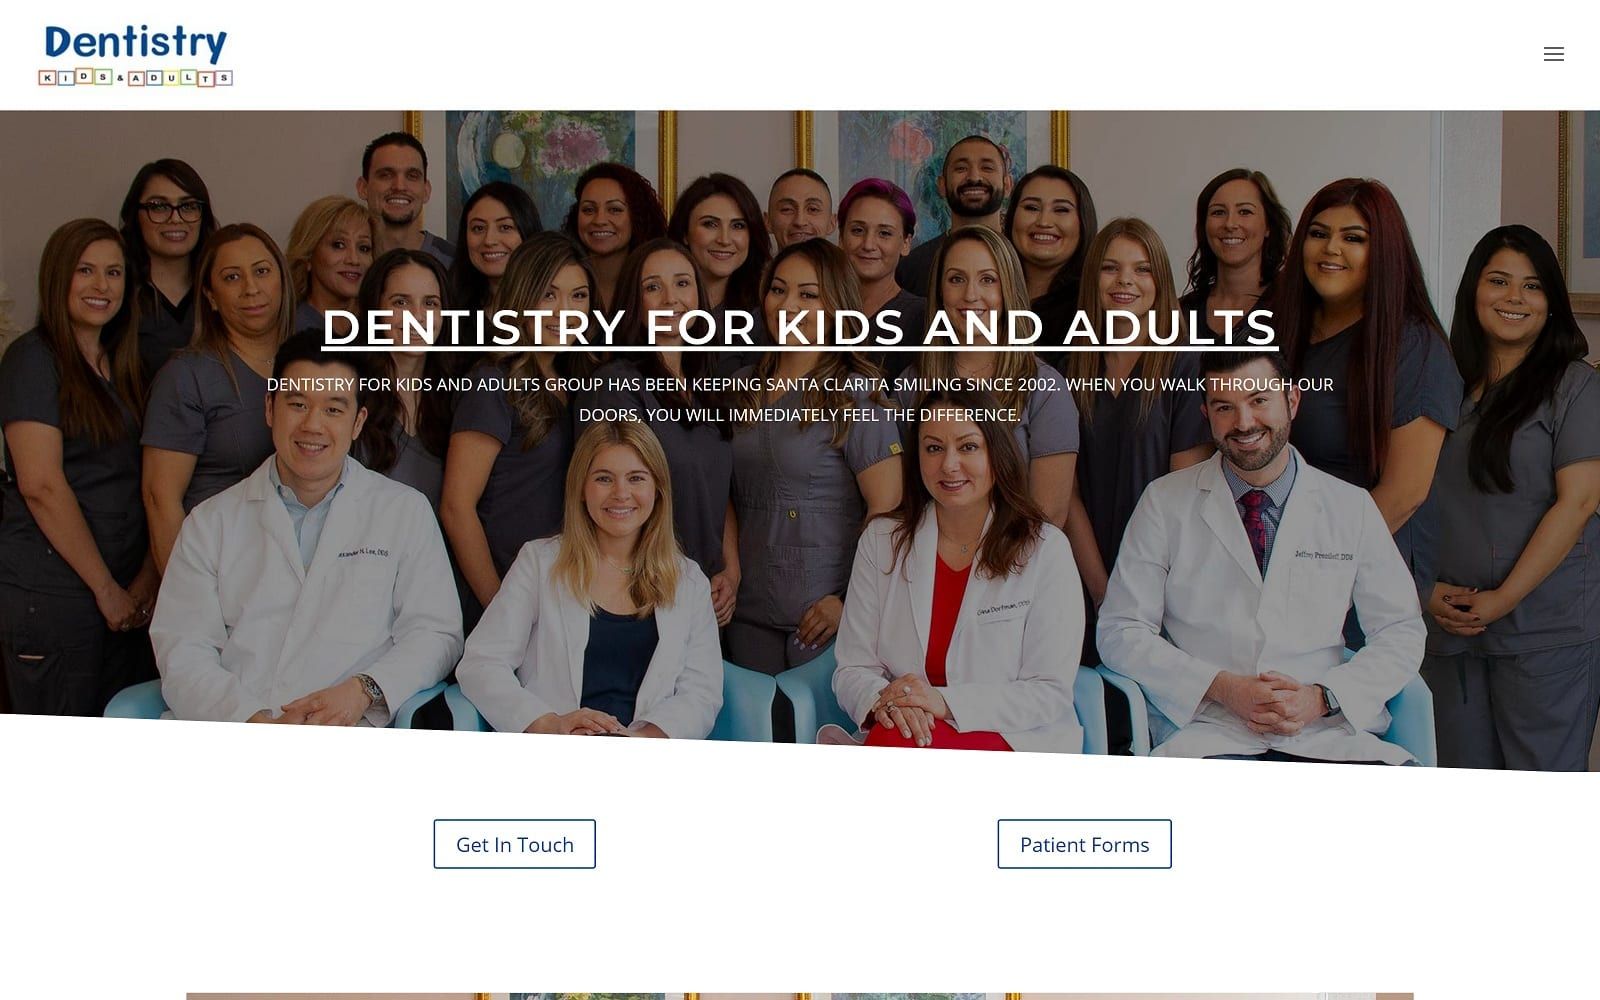 The screenshot of dentistry for kids & adults yourdentist. Net website